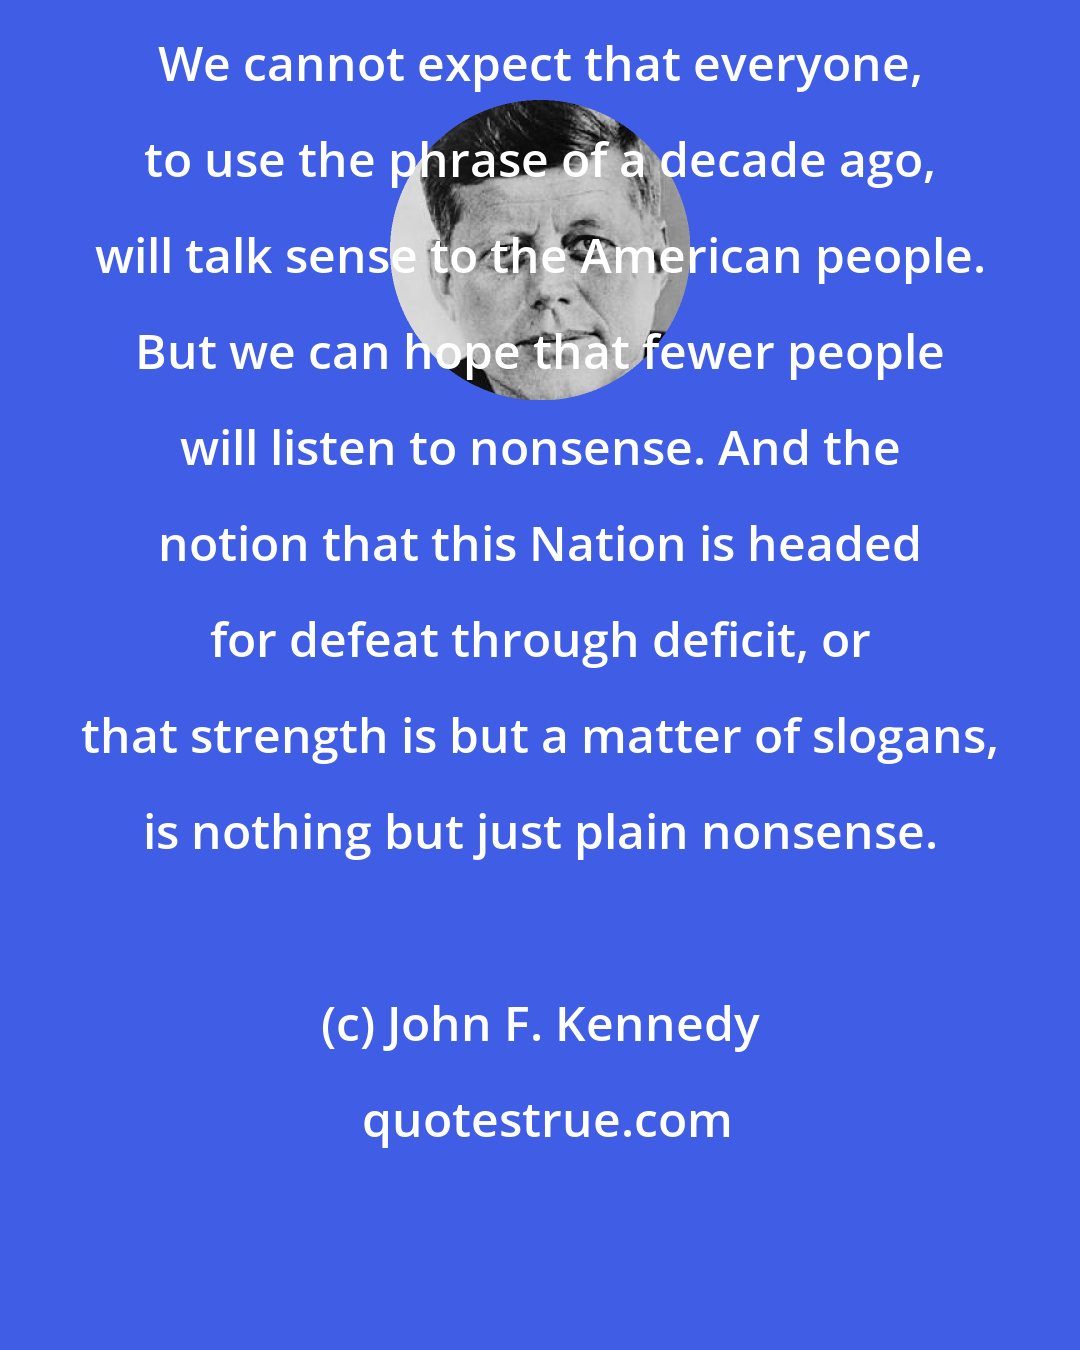 John F. Kennedy: We cannot expect that everyone, to use the phrase of a decade ago, will talk sense to the American people. But we can hope that fewer people will listen to nonsense. And the notion that this Nation is headed for defeat through deficit, or that strength is but a matter of slogans, is nothing but just plain nonsense.